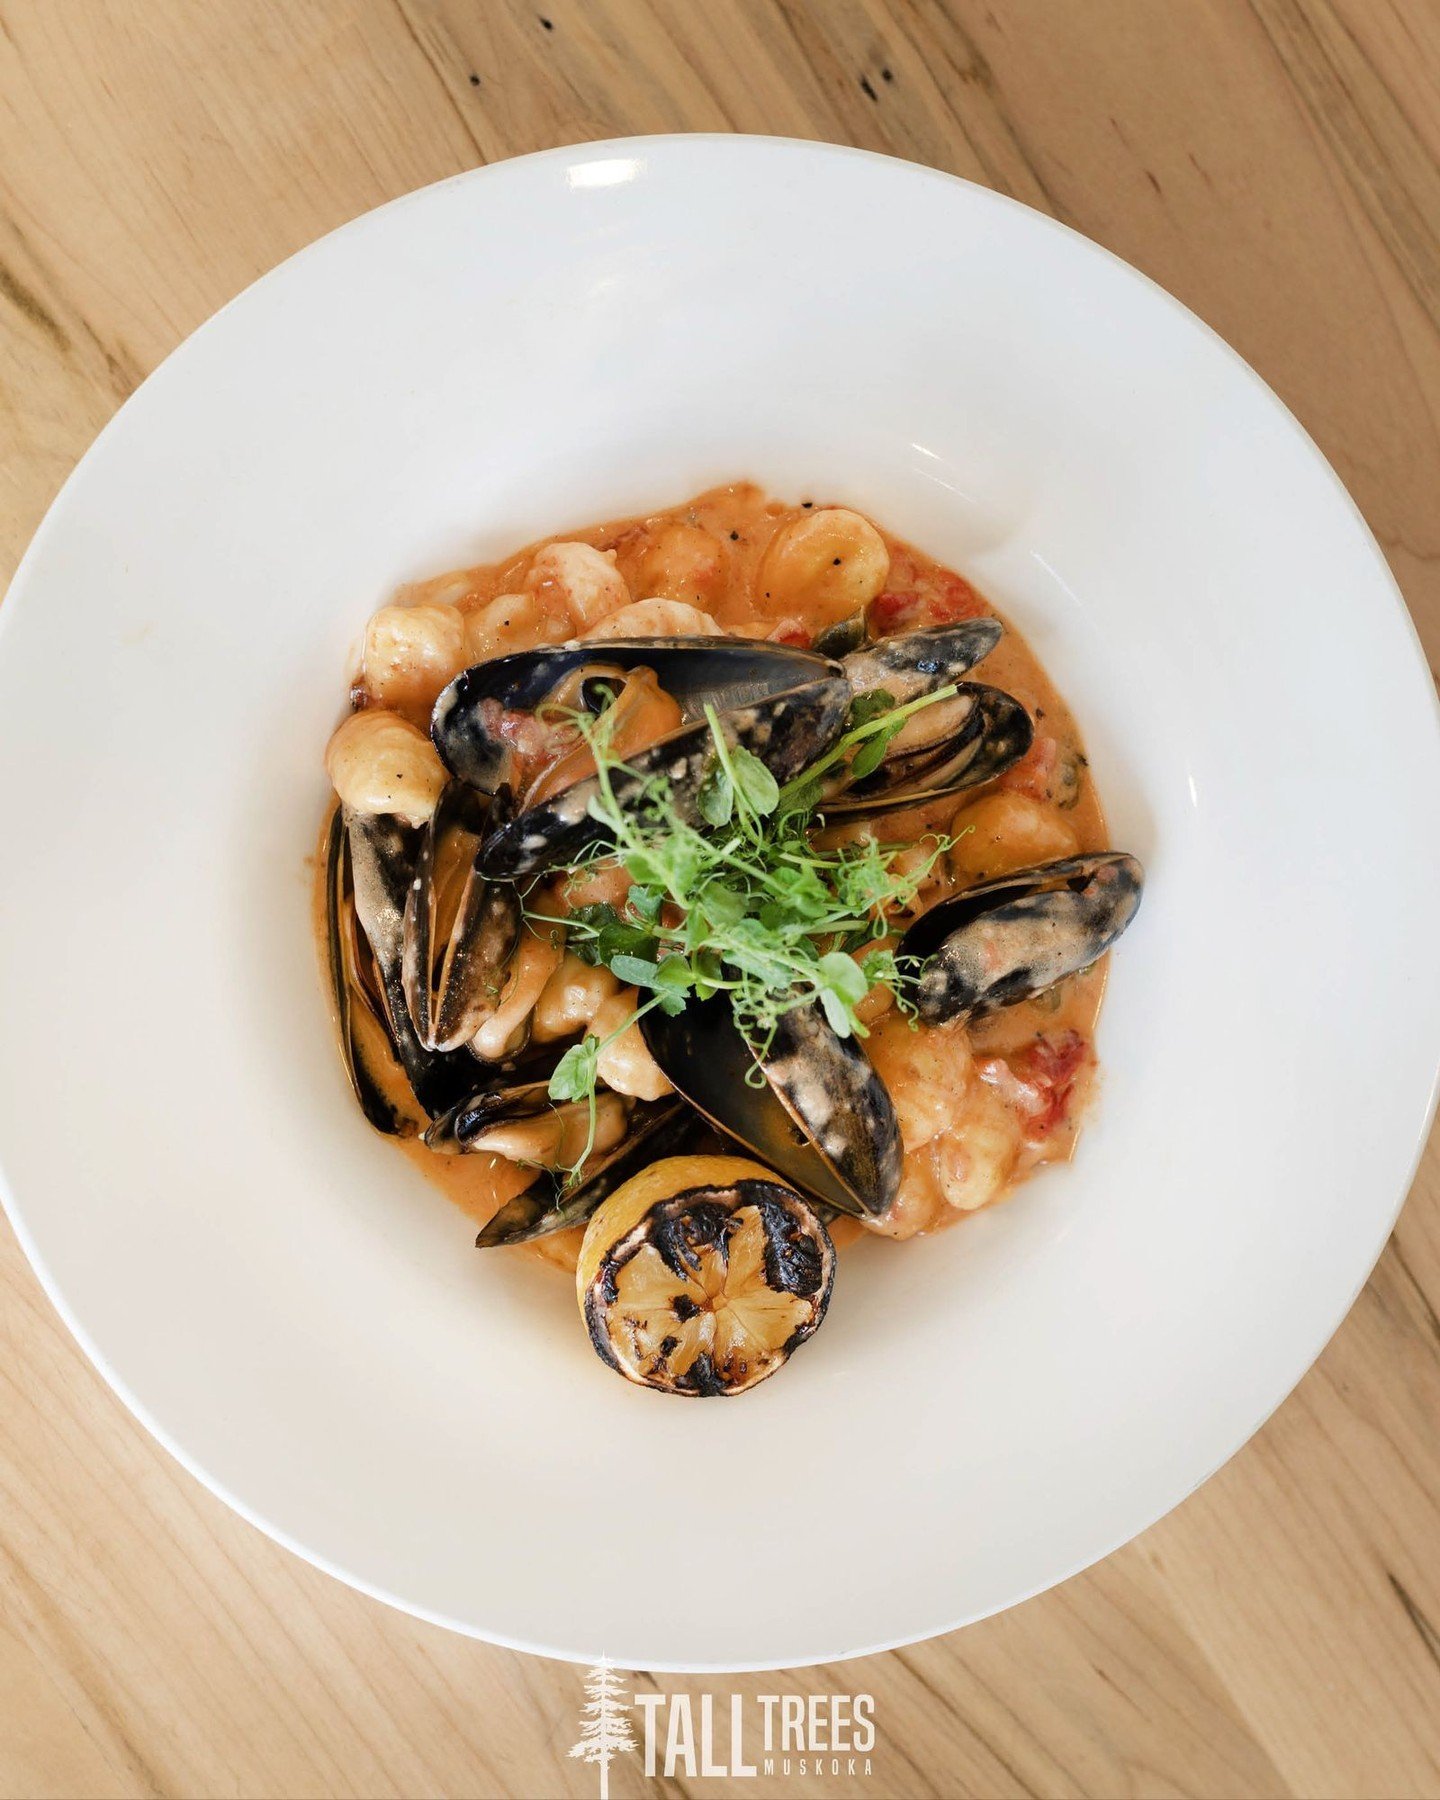 Experience the new pasta addition to our Spring and Summer Three-Course Menu, our Gnocchi with Shrimp and Mussels.

Soft gnocchi, succulent shrimp and tender mussels are bathed in a decadent fire-roasted tomato caper cream sauce with wilted spinach, 